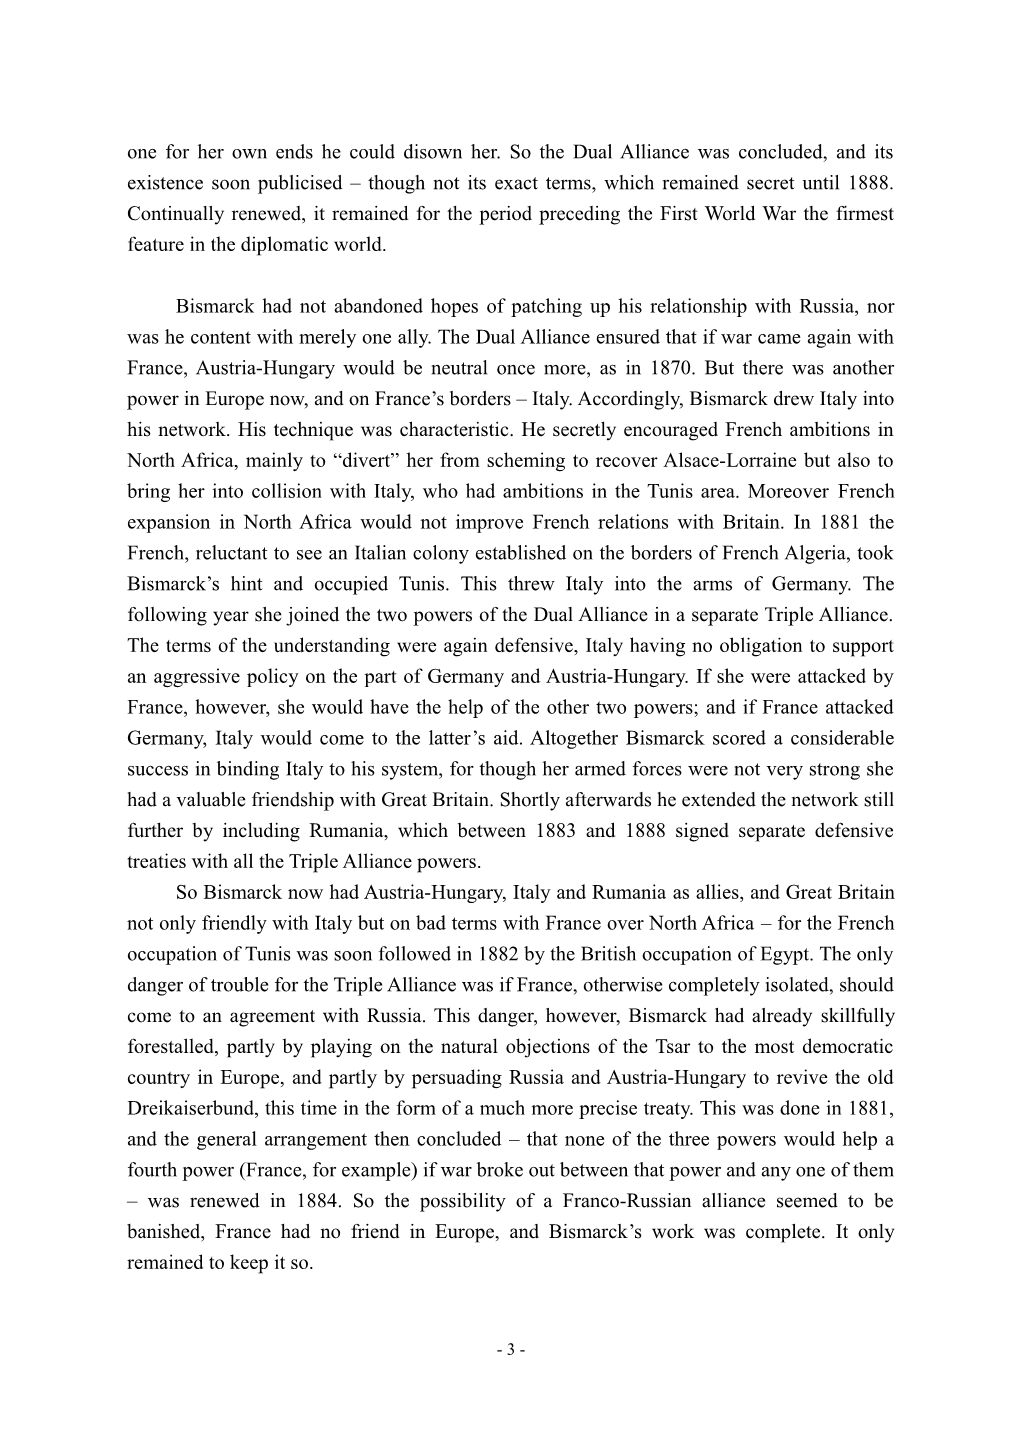 Bismarck S Foreign Policy and the Framing of the European Alliances, 1871-1907